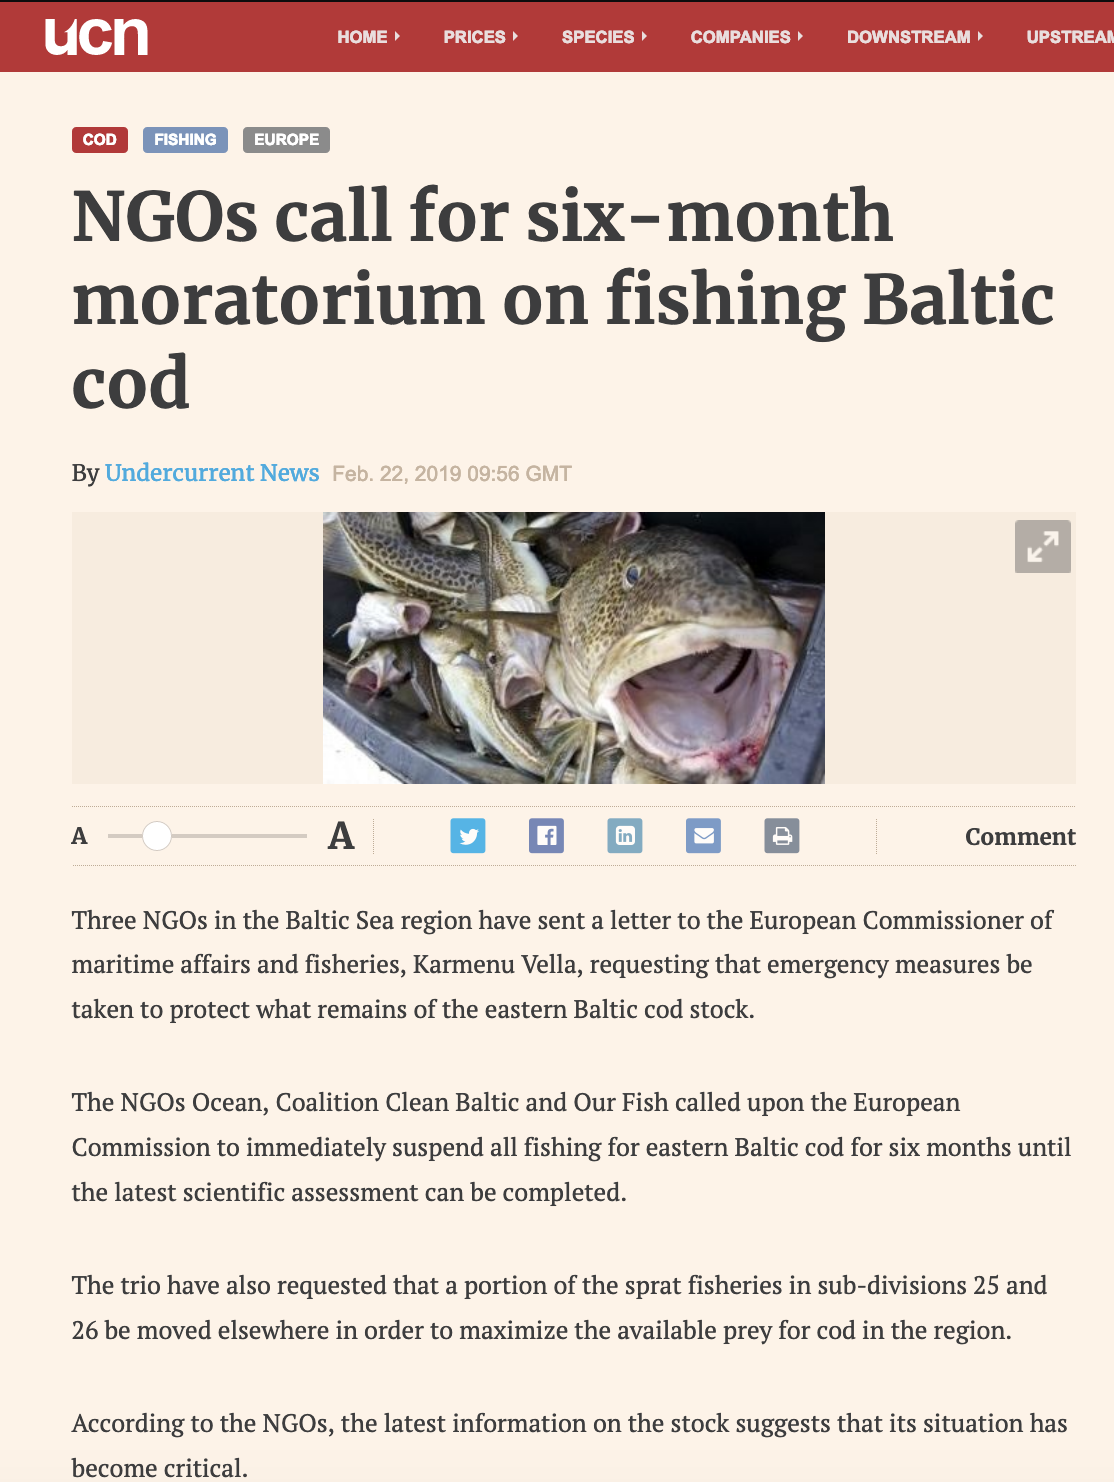 NGOs call for six-month moratorium on fishing Baltic cod